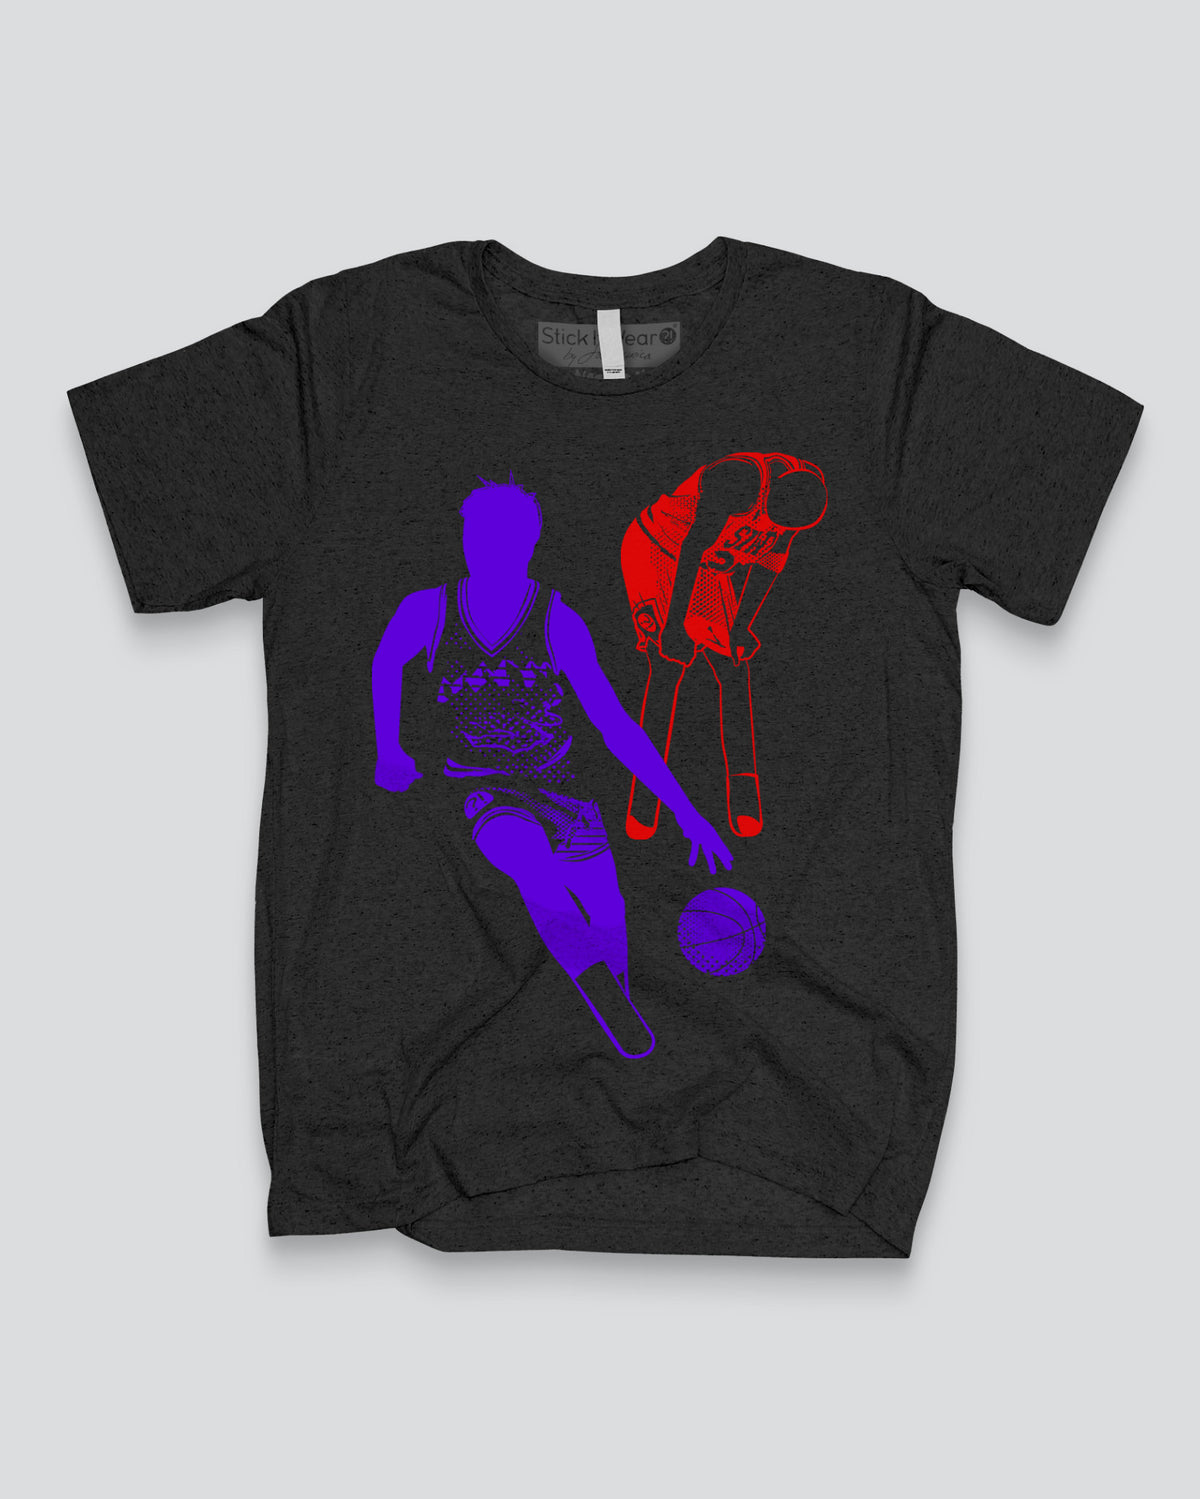 A SPECTACULAR MOVE 05 Basketball Stance T-Shirt